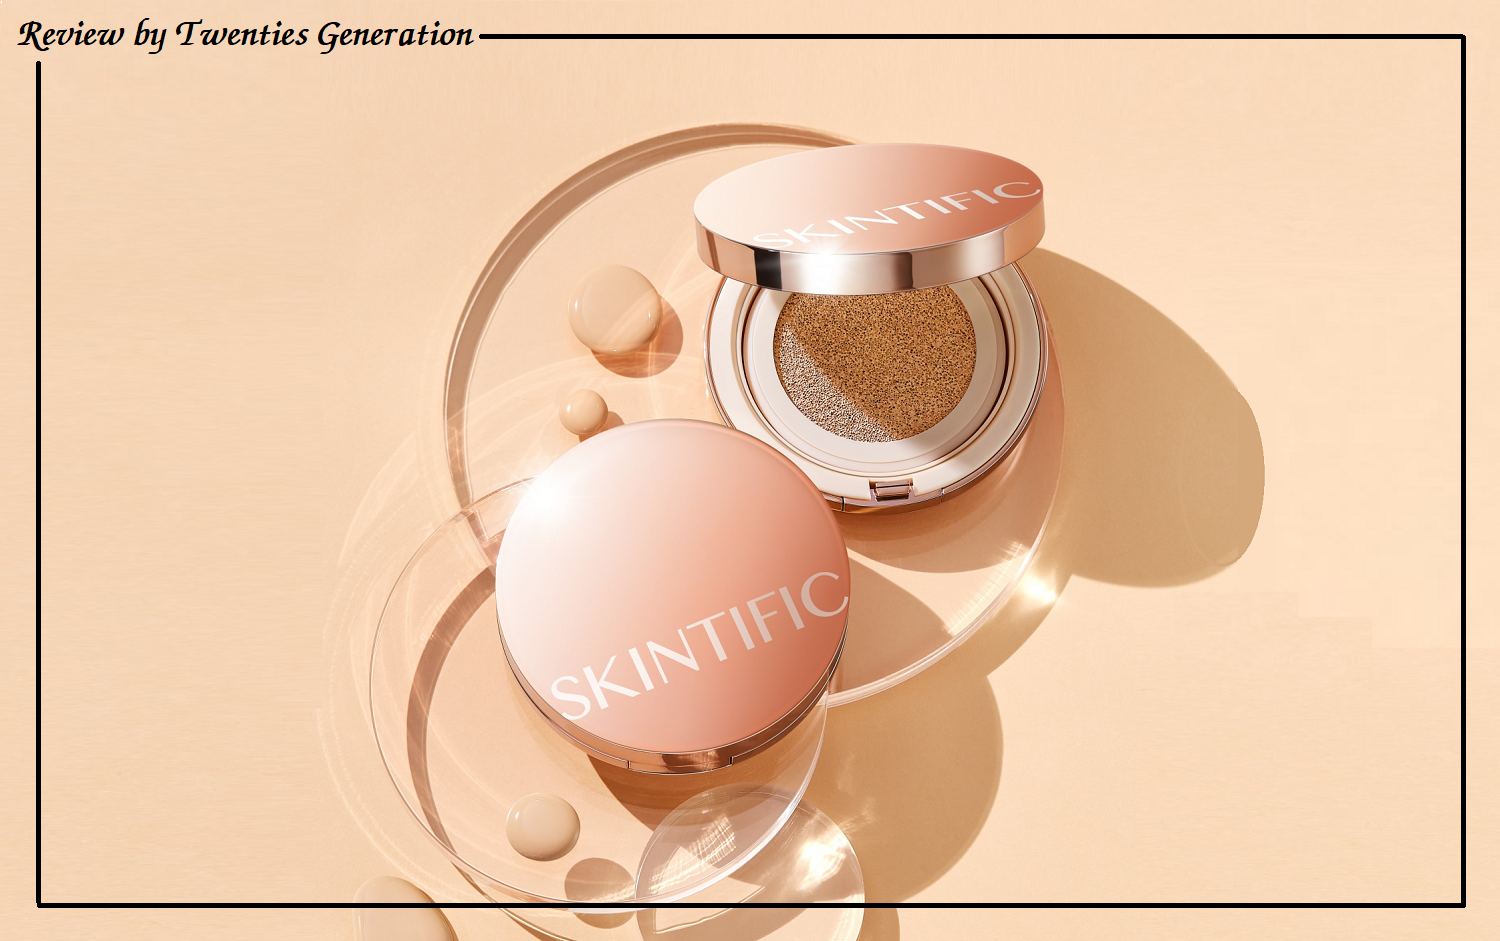 Skintific Cover All Perfect Cushion Ingredients